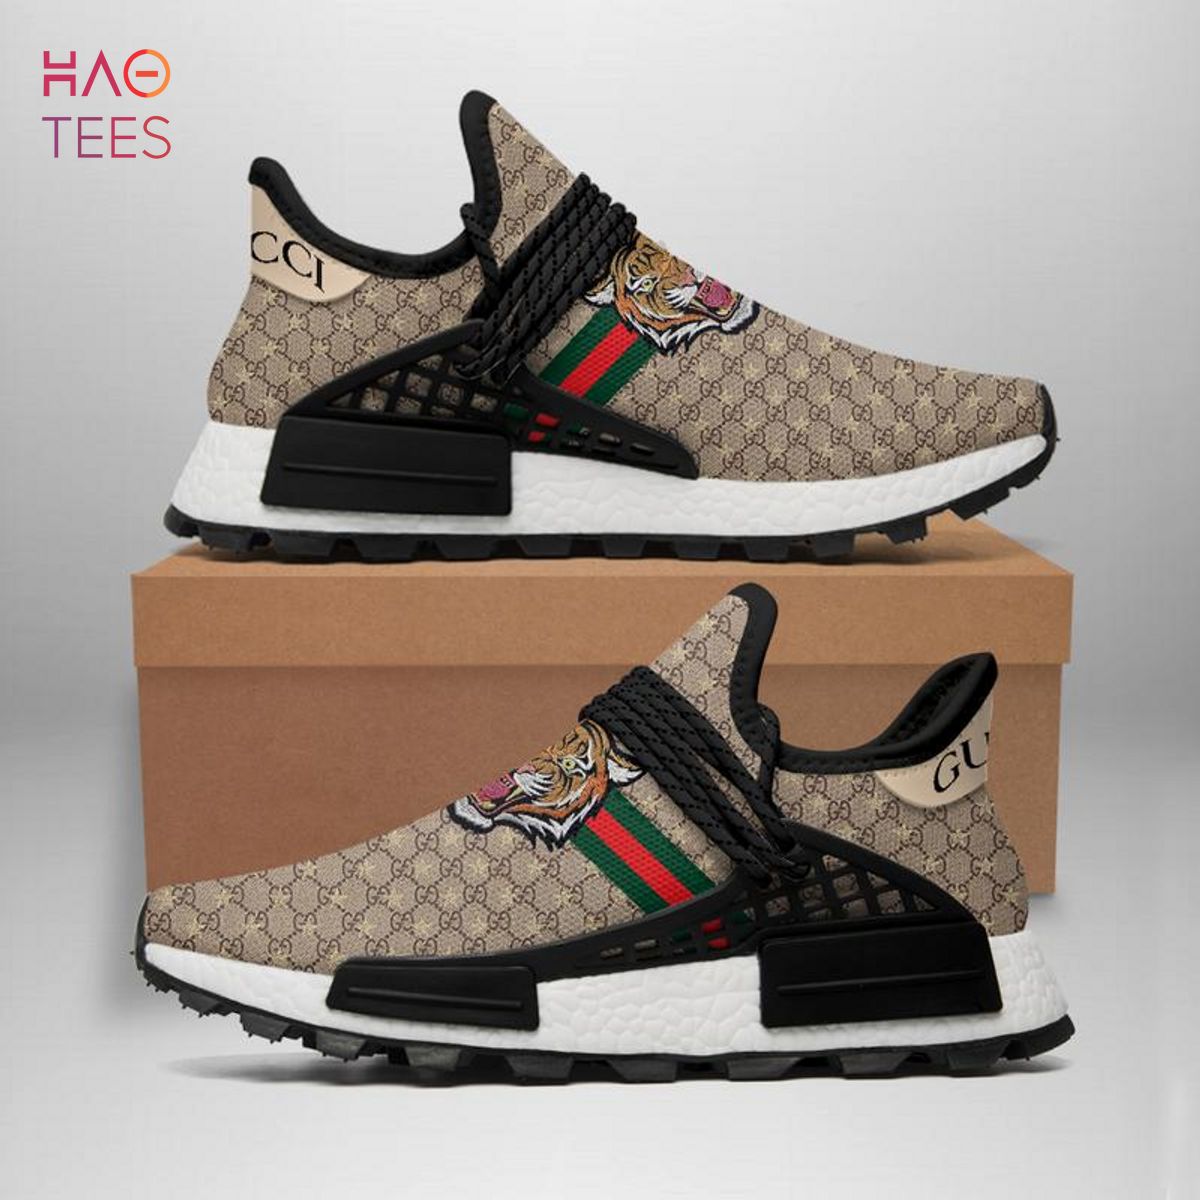 Gucci Tiger Human Race Sneakers Hot 2022